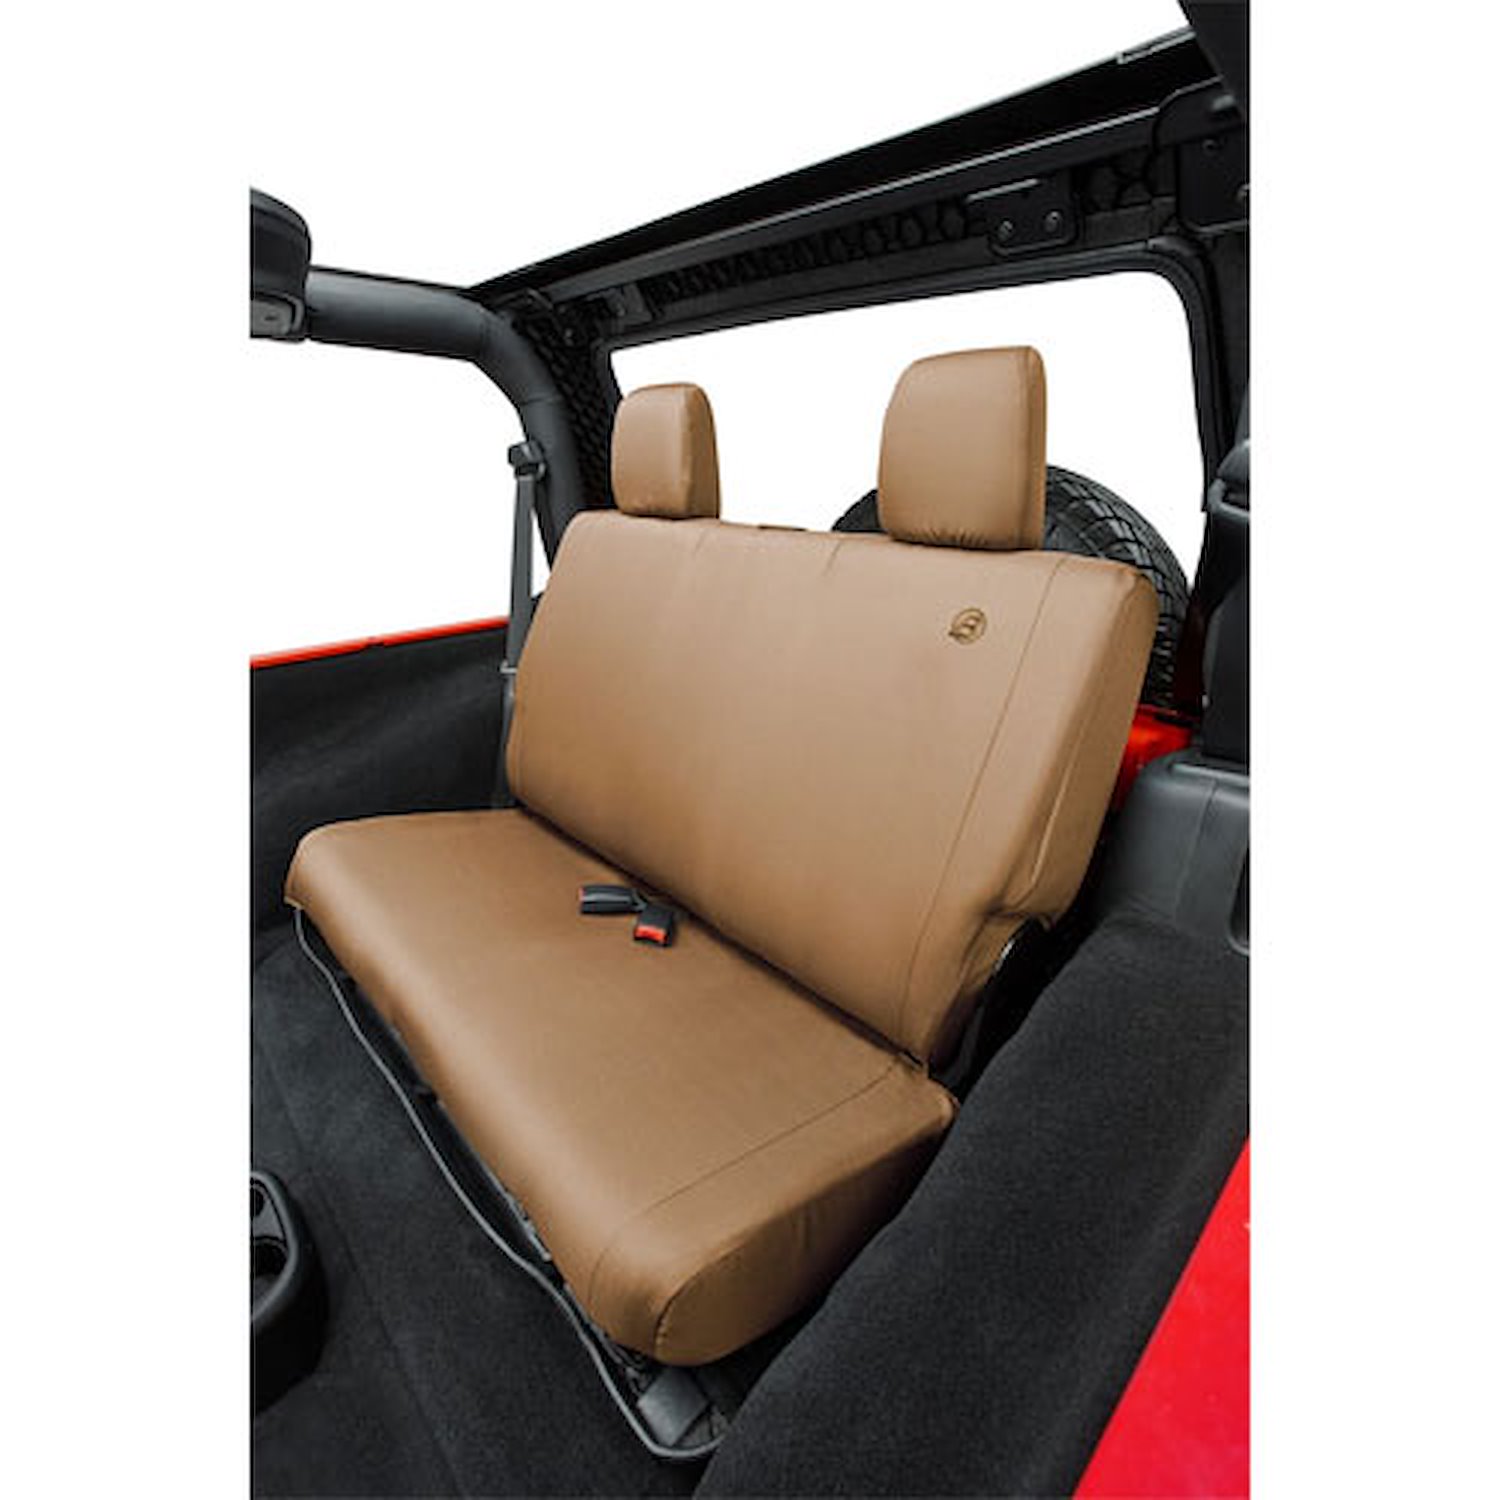 Seat Covers, Tan, Fit Factory Original Seats in Good Condition,